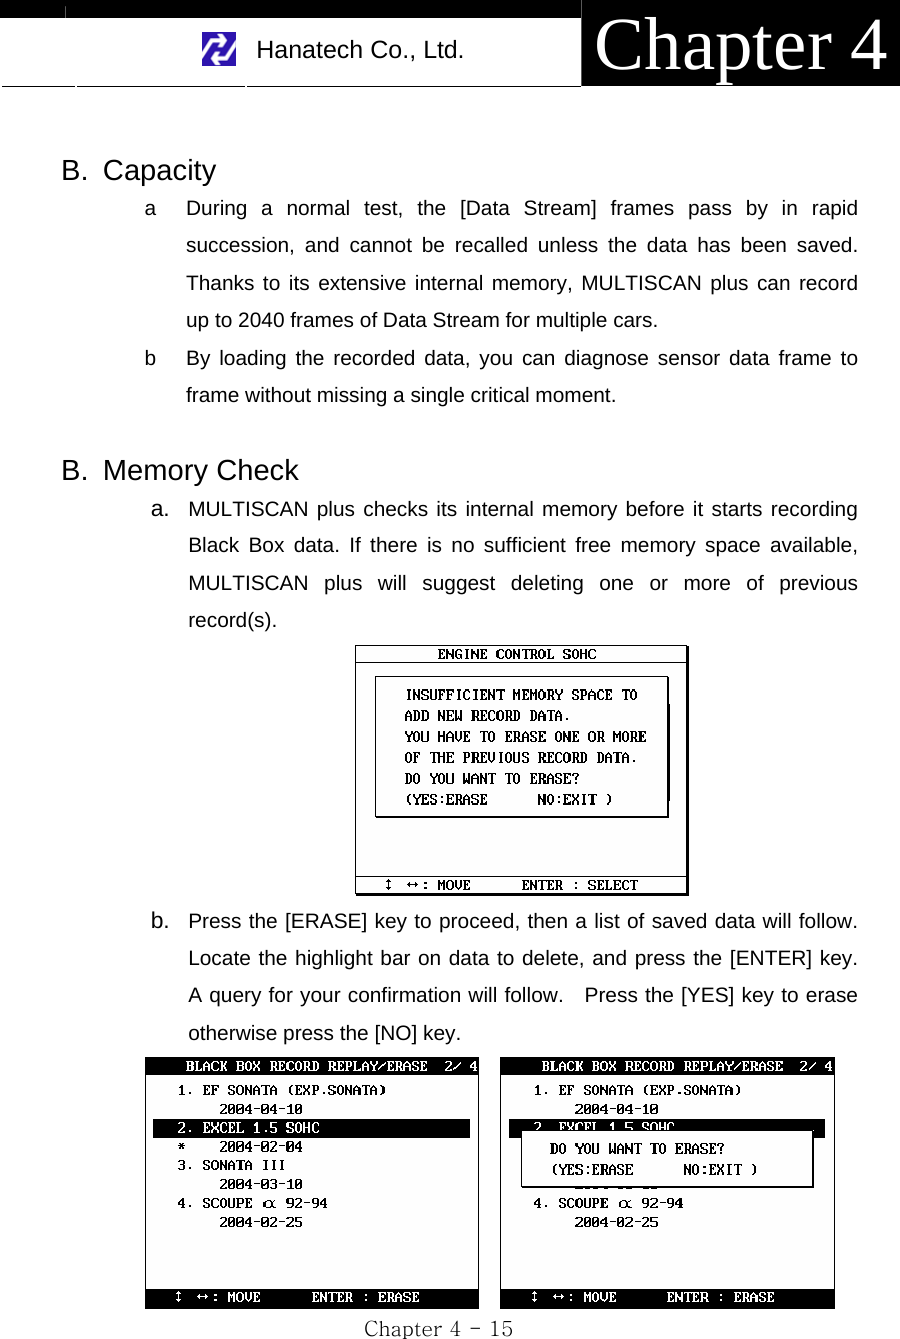     Hanatech Co., Ltd.  Chapter 4 Chapter 4 - 15  B. Capacity a  During a normal test, the [Data Stream] frames pass by in rapid succession, and cannot be recalled unless the data has been saved.  Thanks to its extensive internal memory, MULTISCAN plus can record up to 2040 frames of Data Stream for multiple cars. b  By loading the recorded data, you can diagnose sensor data frame to frame without missing a single critical moment.  B. Memory Check a.  MULTISCAN plus checks its internal memory before it starts recording Black Box data. If there is no sufficient free memory space available, MULTISCAN plus will suggest deleting one or more of previous record(s).  b.  Press the [ERASE] key to proceed, then a list of saved data will follow.  Locate the highlight bar on data to delete, and press the [ENTER] key.  A query for your confirmation will follow.    Press the [YES] key to erase otherwise press the [NO] key.     